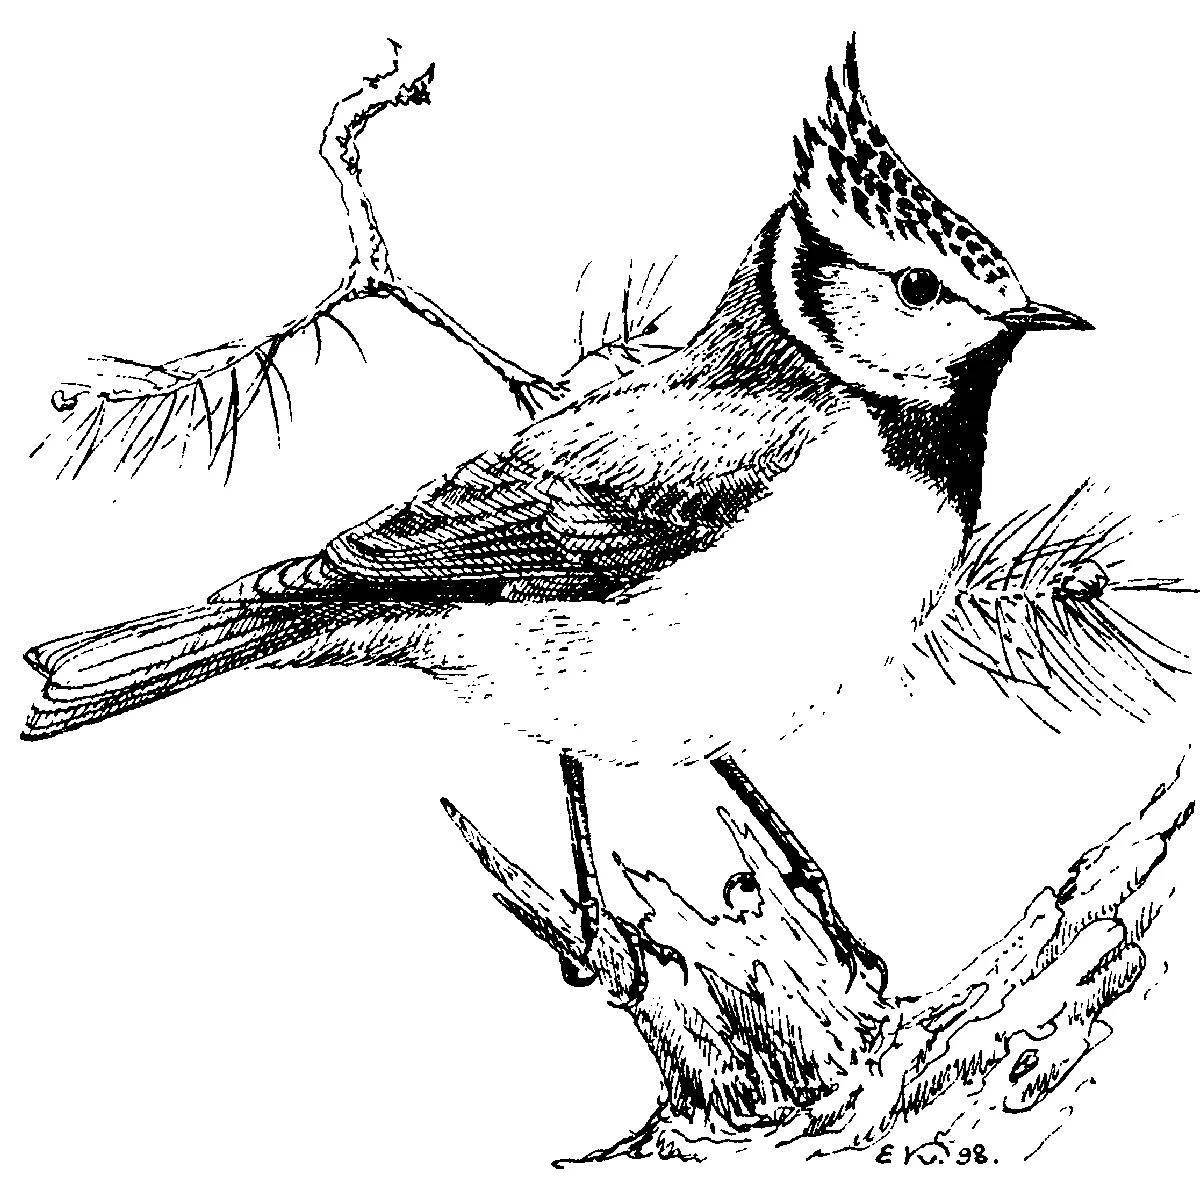 Coloring page amazing waxwing bird